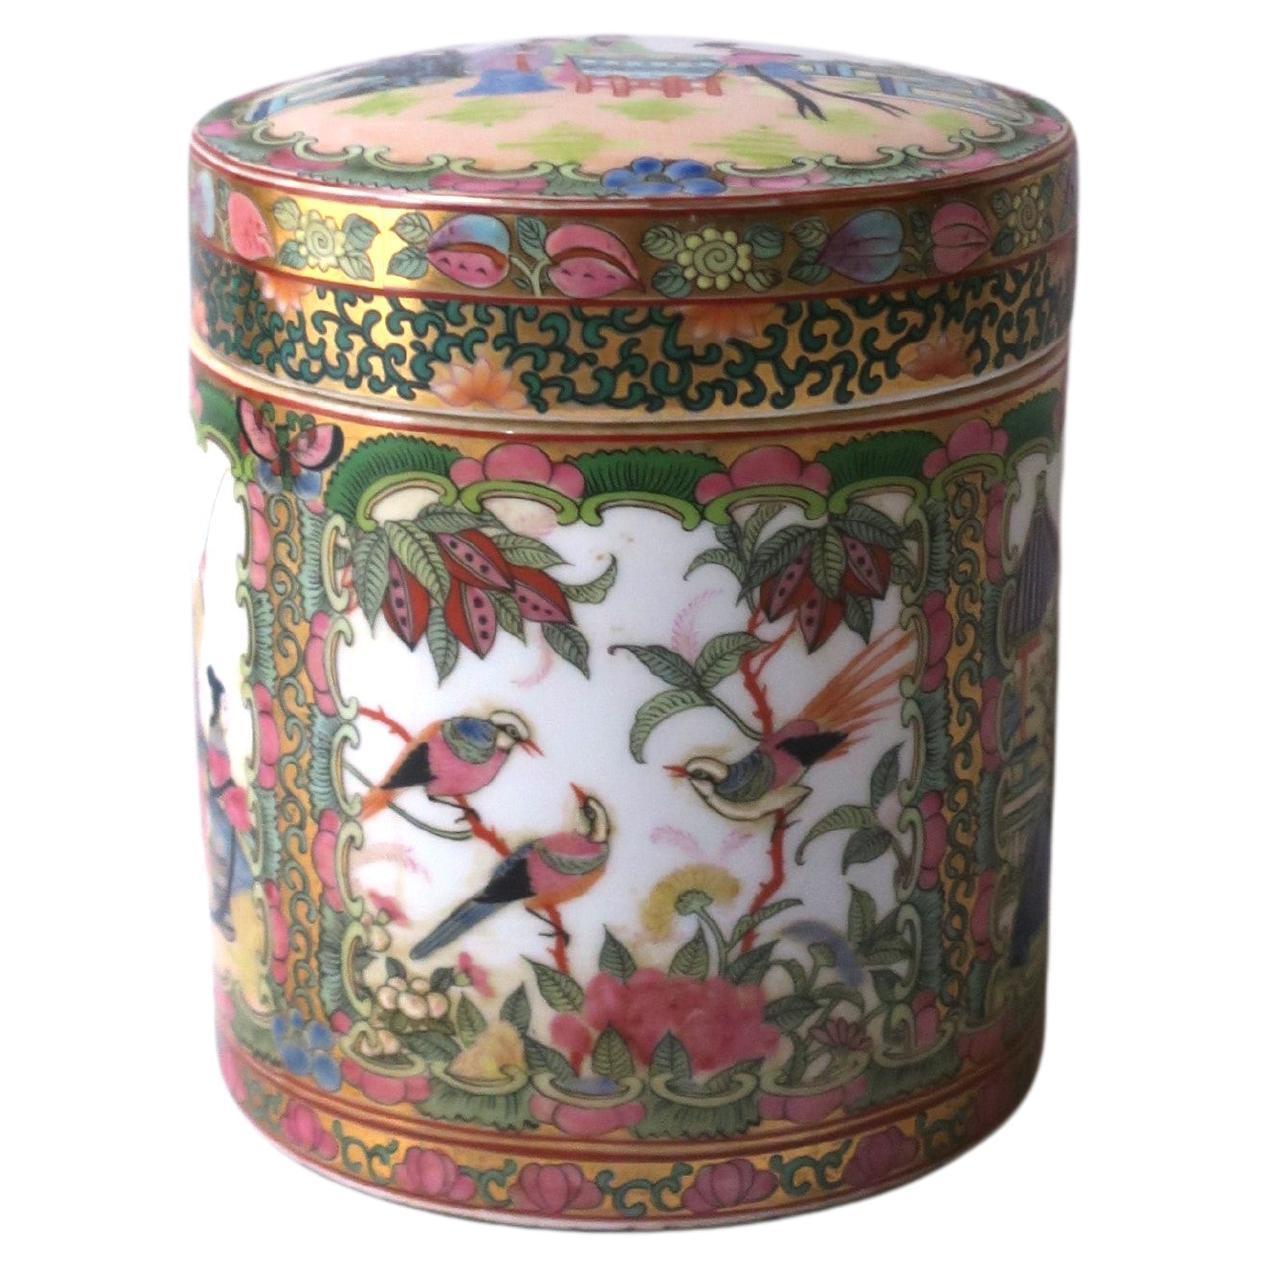 Chinoiserie Famille Rose Decorative Box with Birds Flora and Fauna